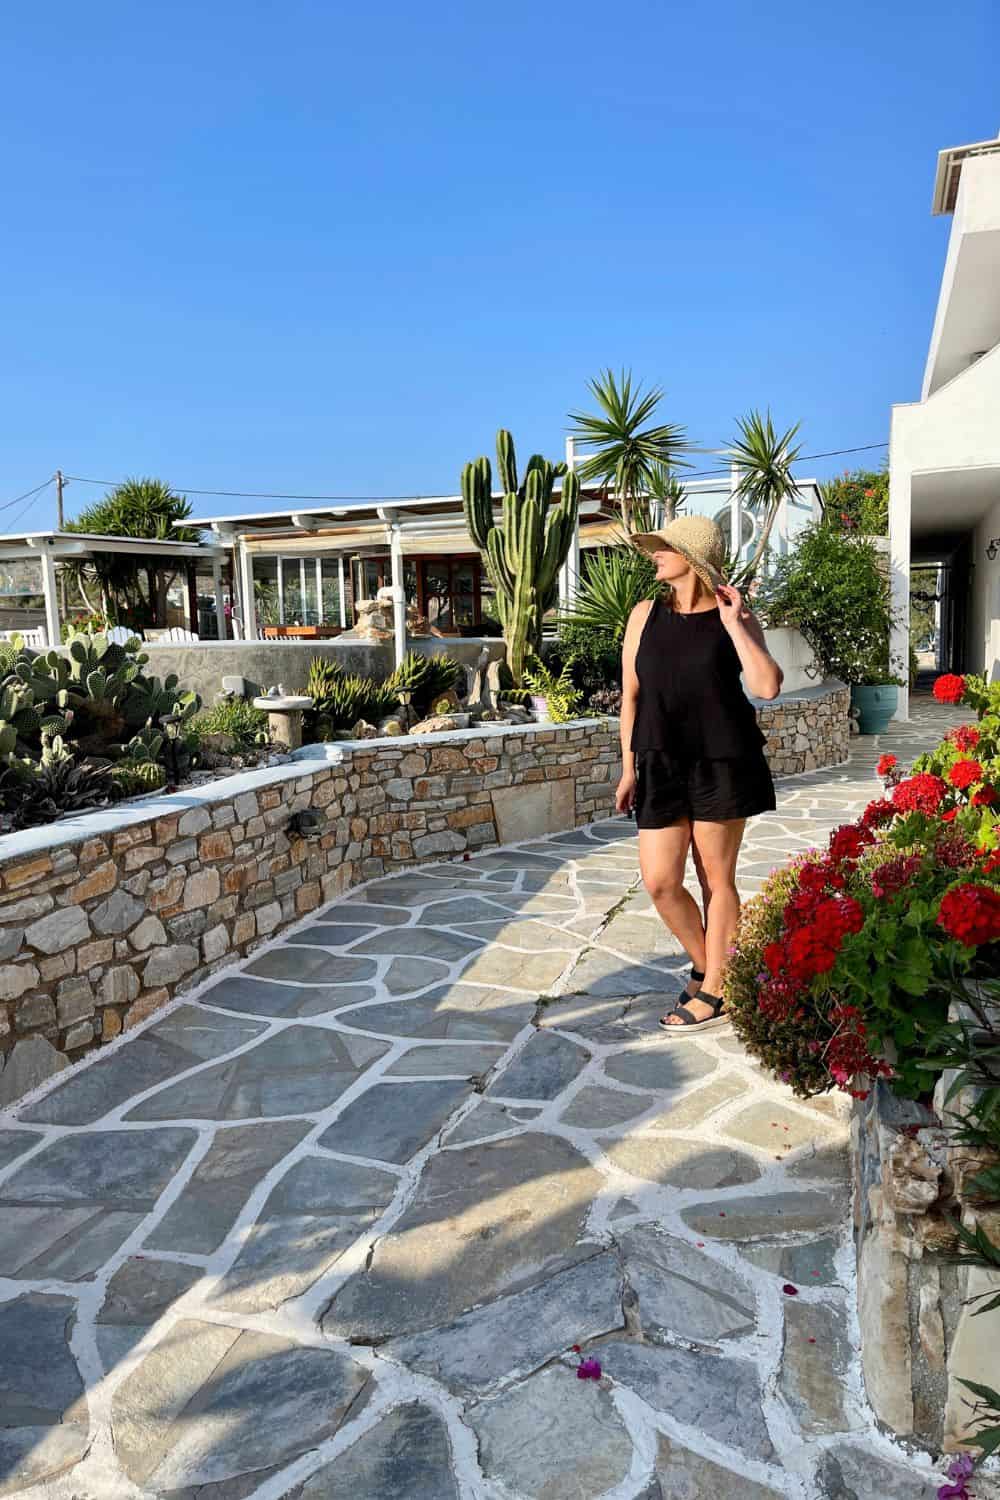 "A woman in casual summer attire and a straw hat strolls along a stone pathway surrounded by vibrant cacti and blooming flowers. In the background, a serene Greek island landscape with a white-washed building boasting a covered patio under a clear blue sky is visible, highlighting the region's unique architecture and flora.